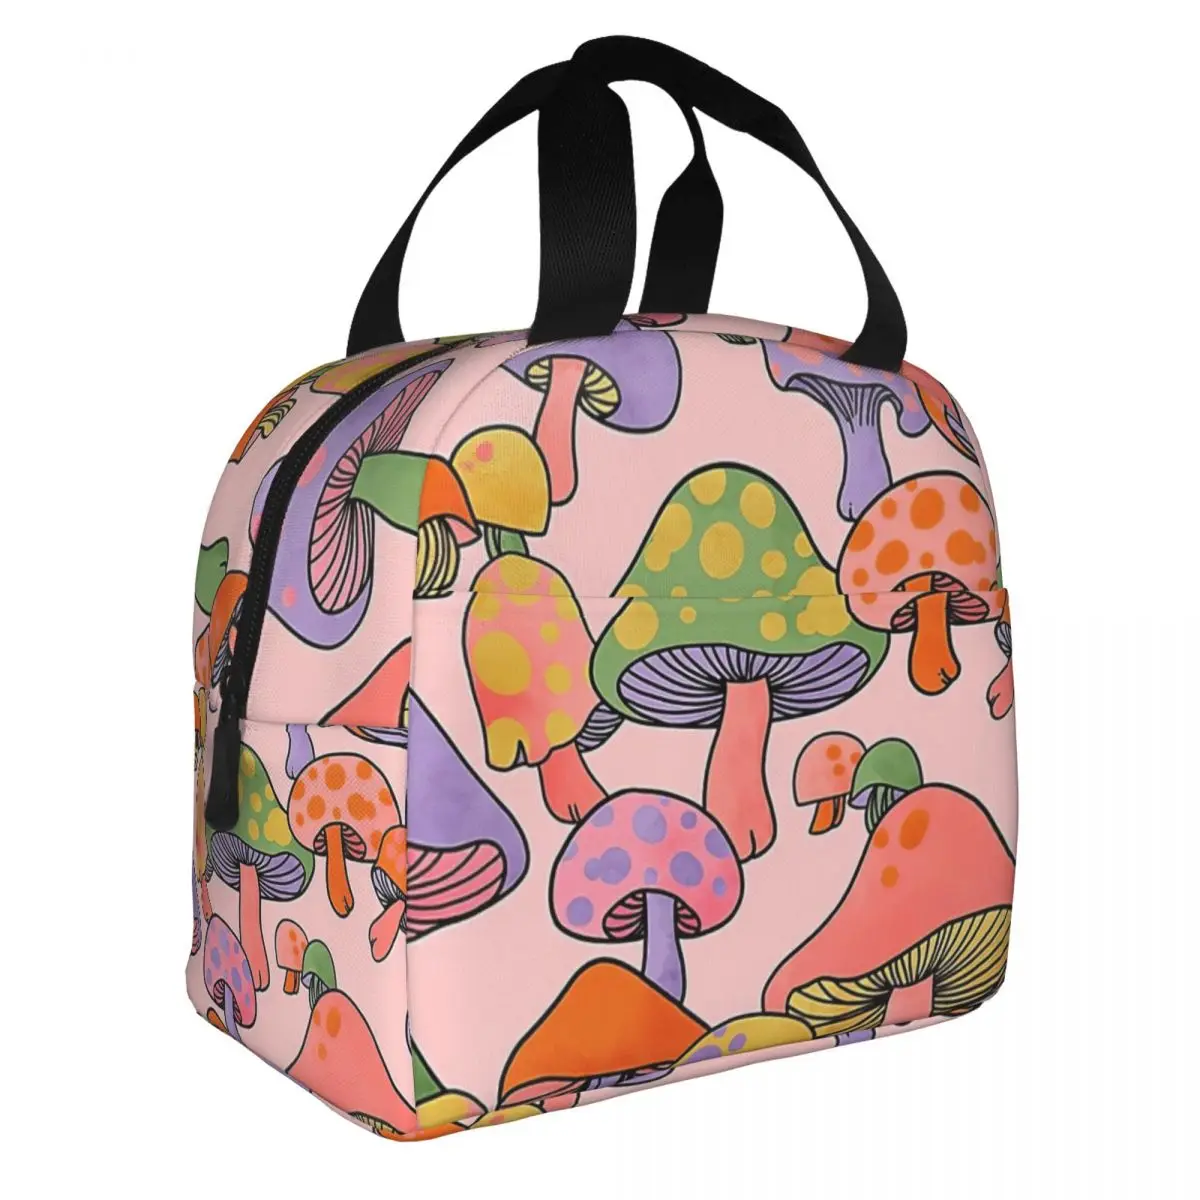 Happy Hippie Mushroom Magic Lunch Bento Bags Portable Aluminum Foil thickened Thermal Cloth Lunch Bag for Women Men Boy